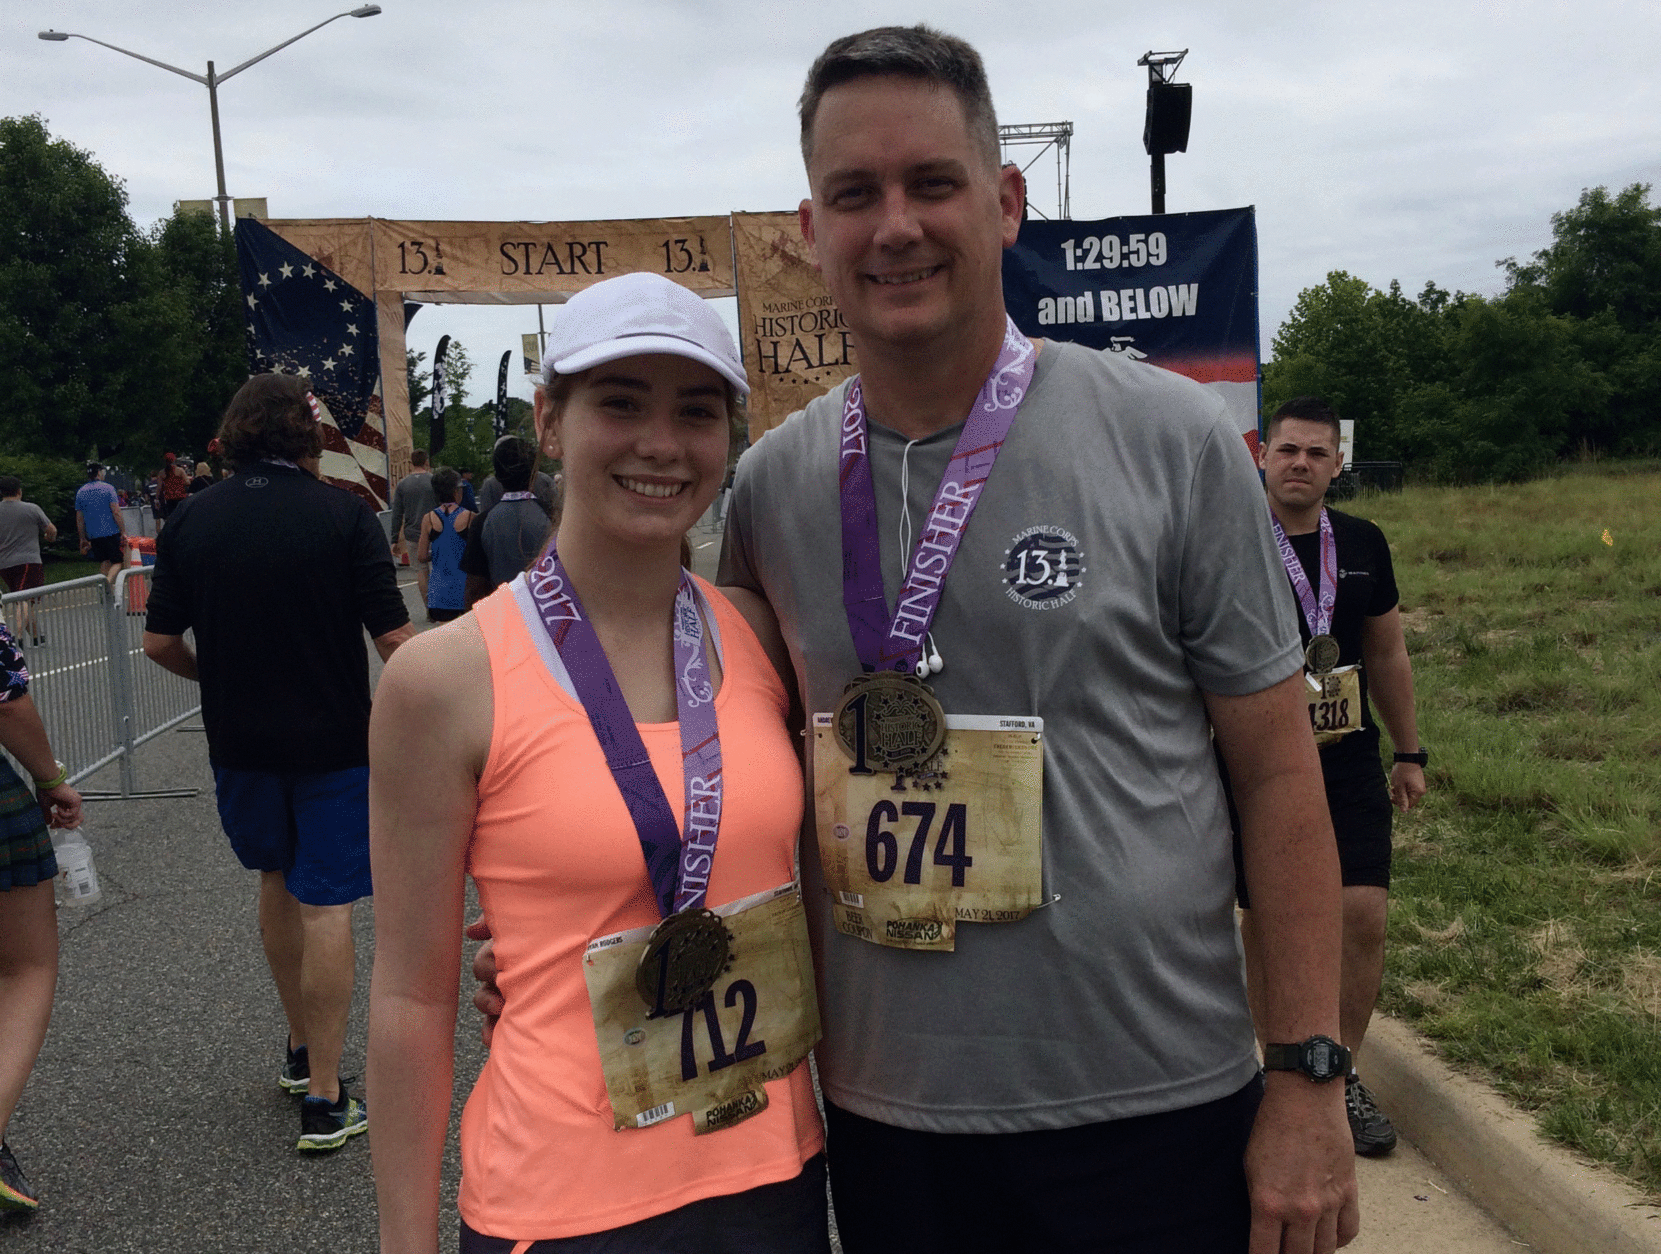 Ryan Rodgers and her dad, Andrew Rodgers after the 2017 Marine Corps Historic Half. It was the pair's 10th running of the event in as many years. (Courtesy Rodgers Family)